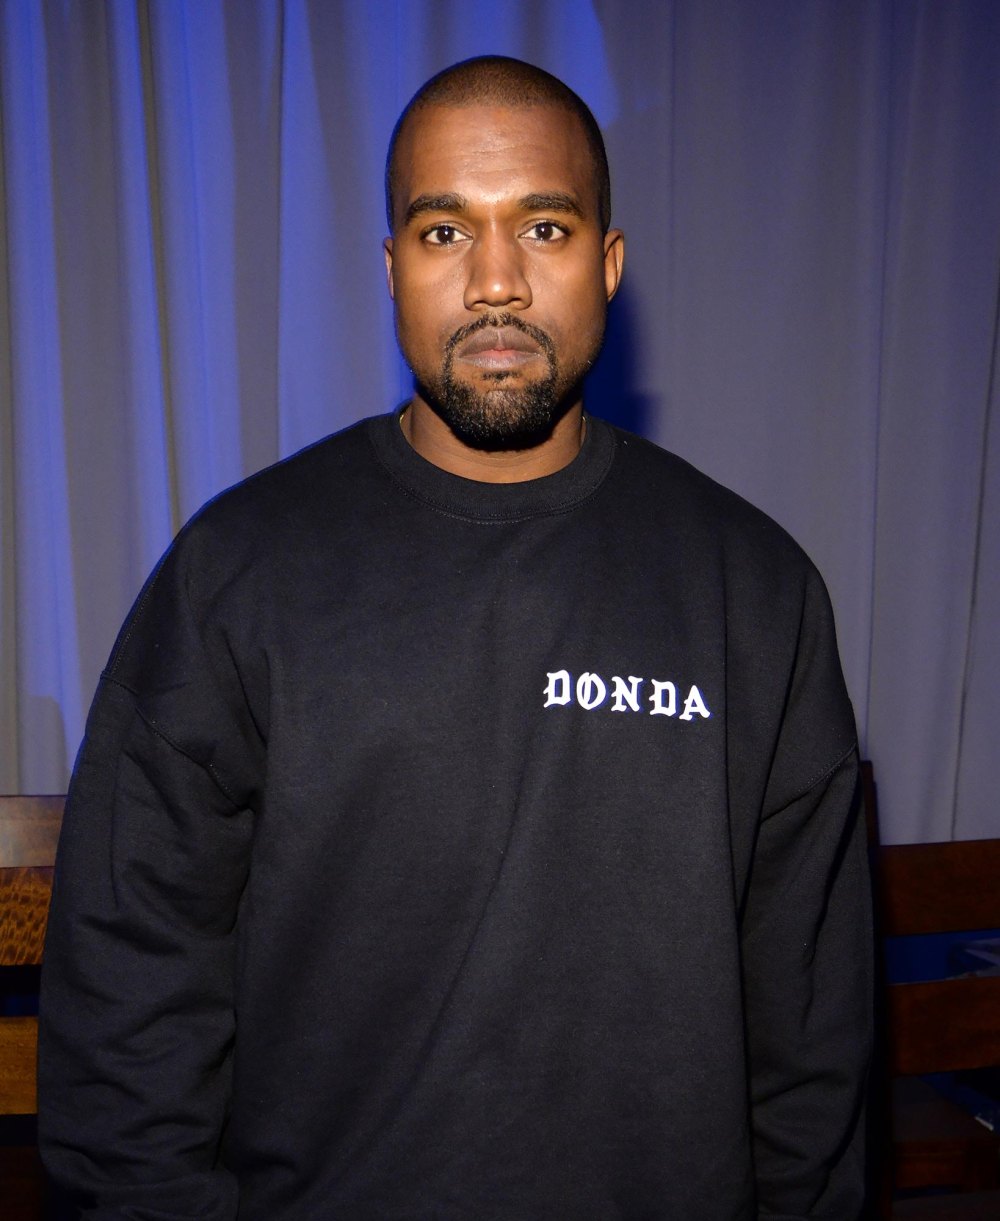 Kanye West ‘Sincerely Apologizes’ For His Antisemitic Comments in New Note Written In Hebrew